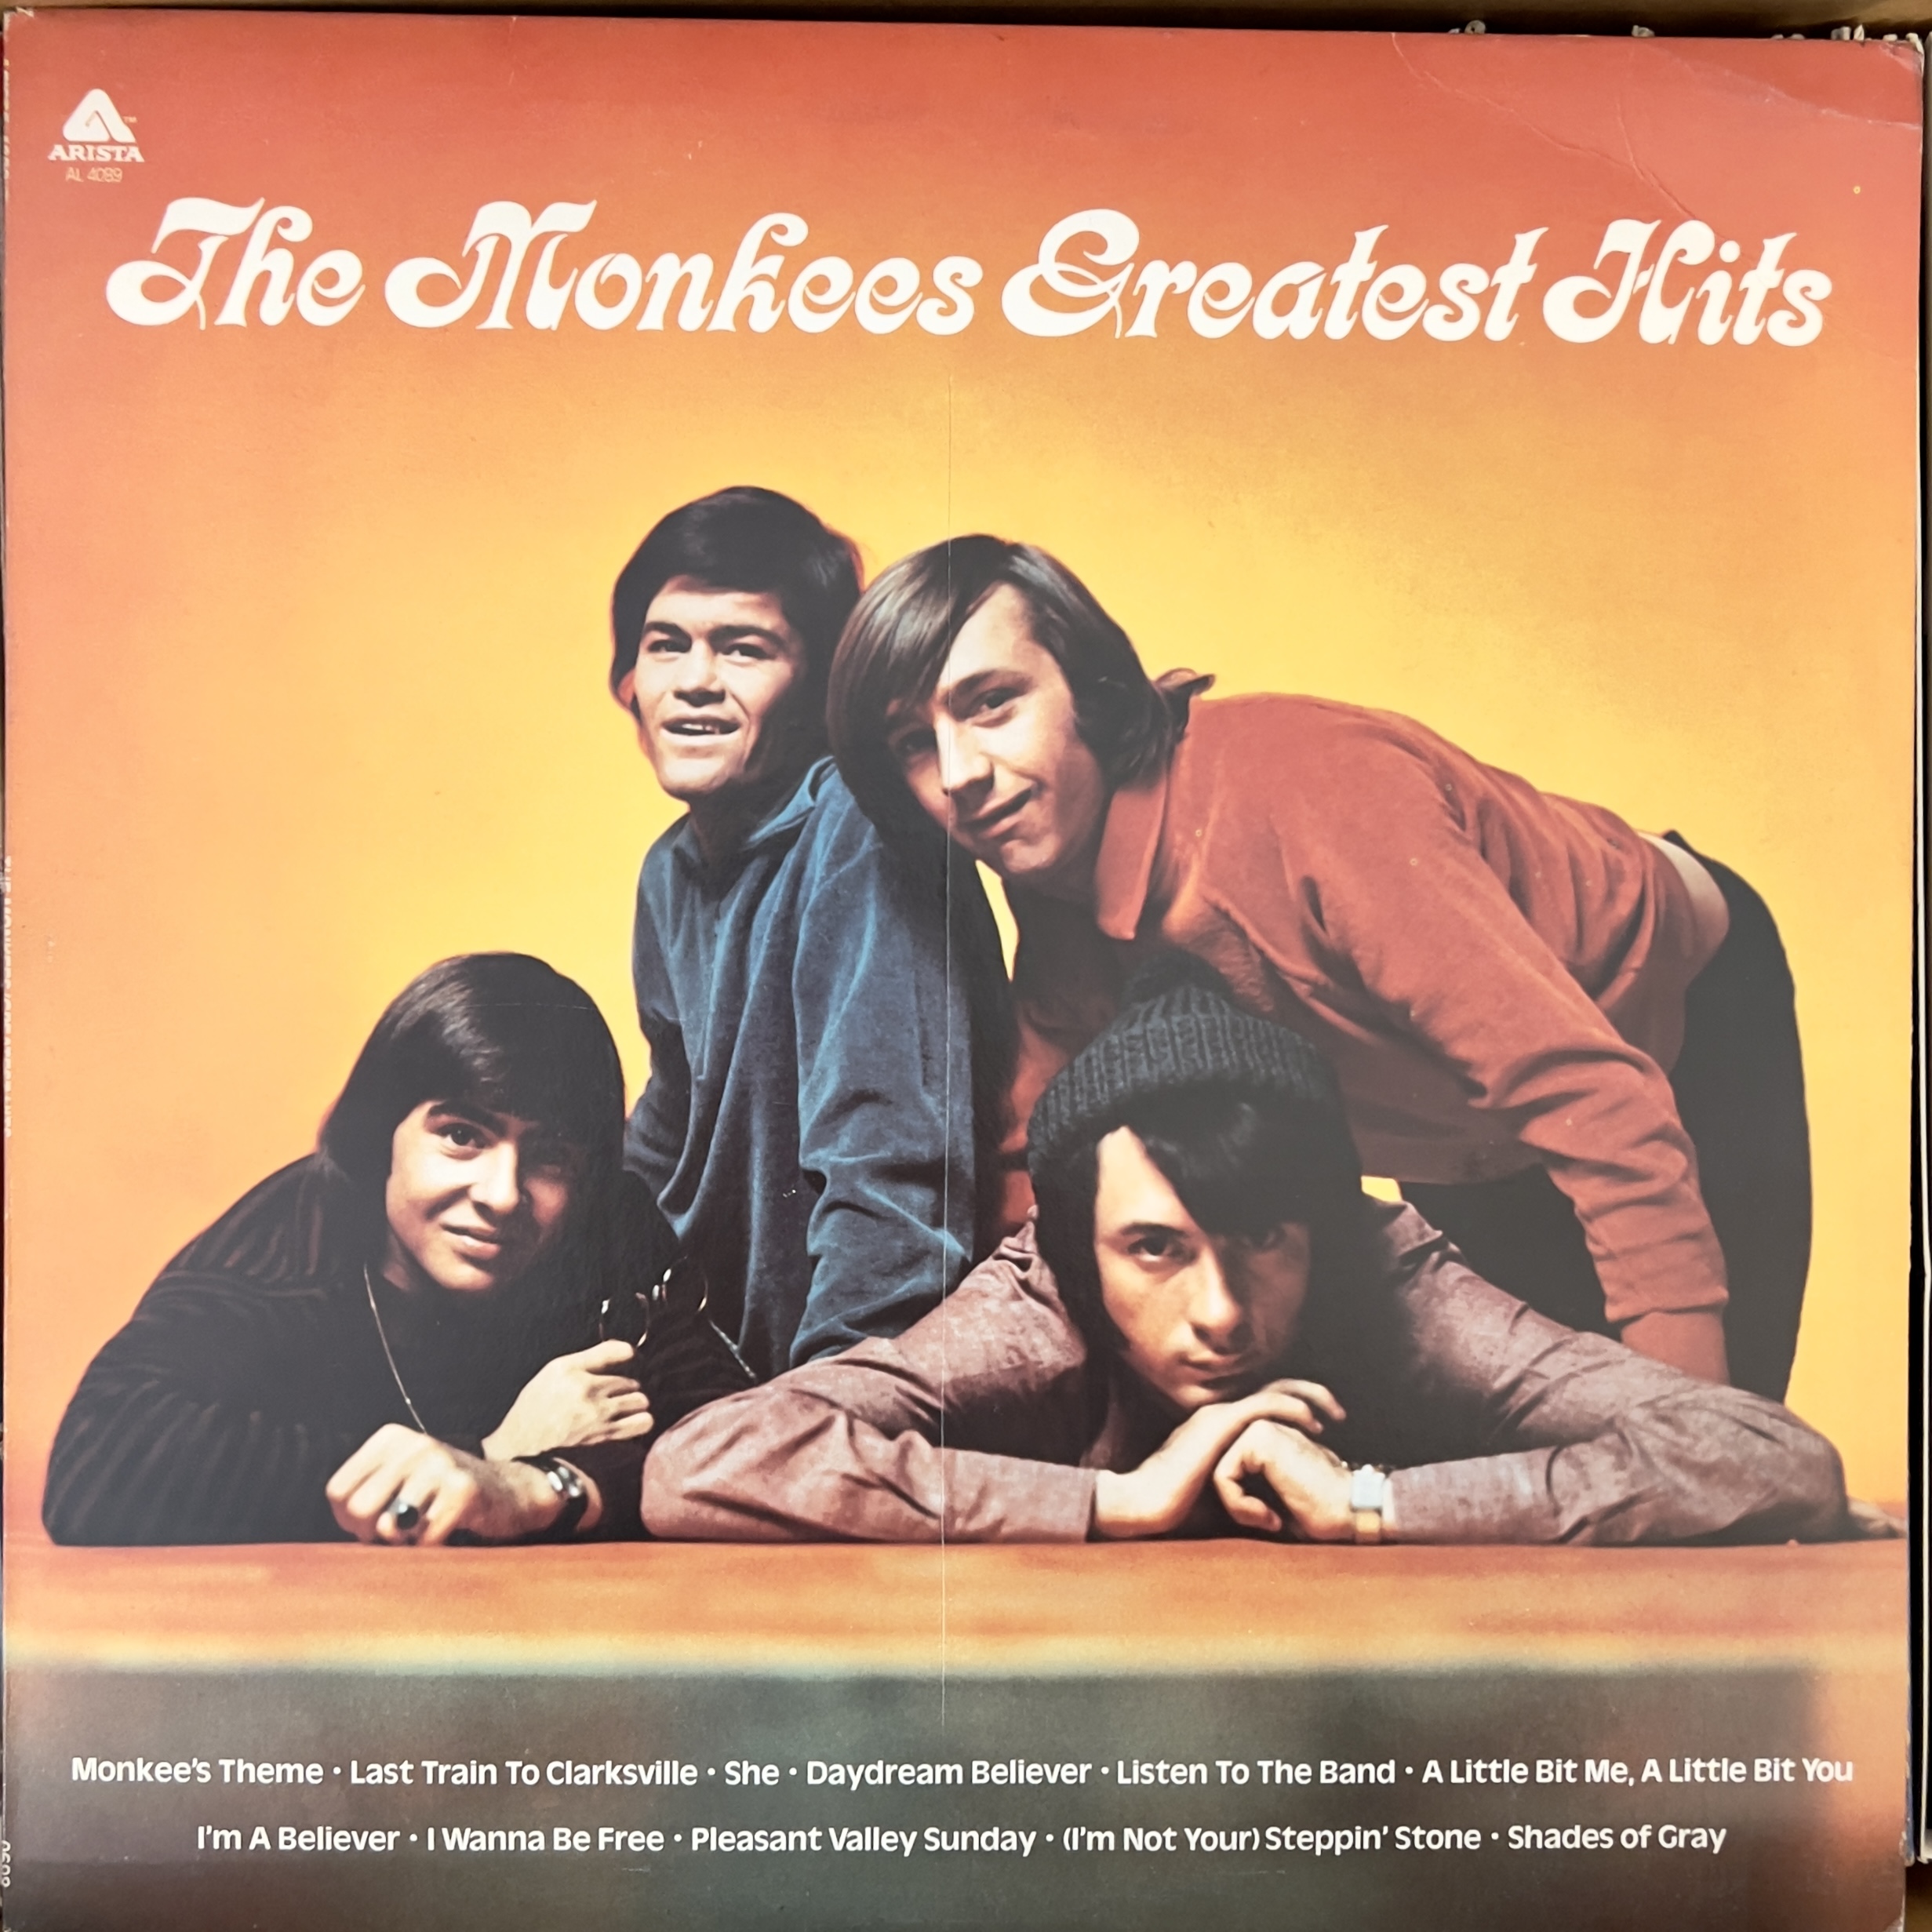 The Monkees Greatest Hits by The Monkees